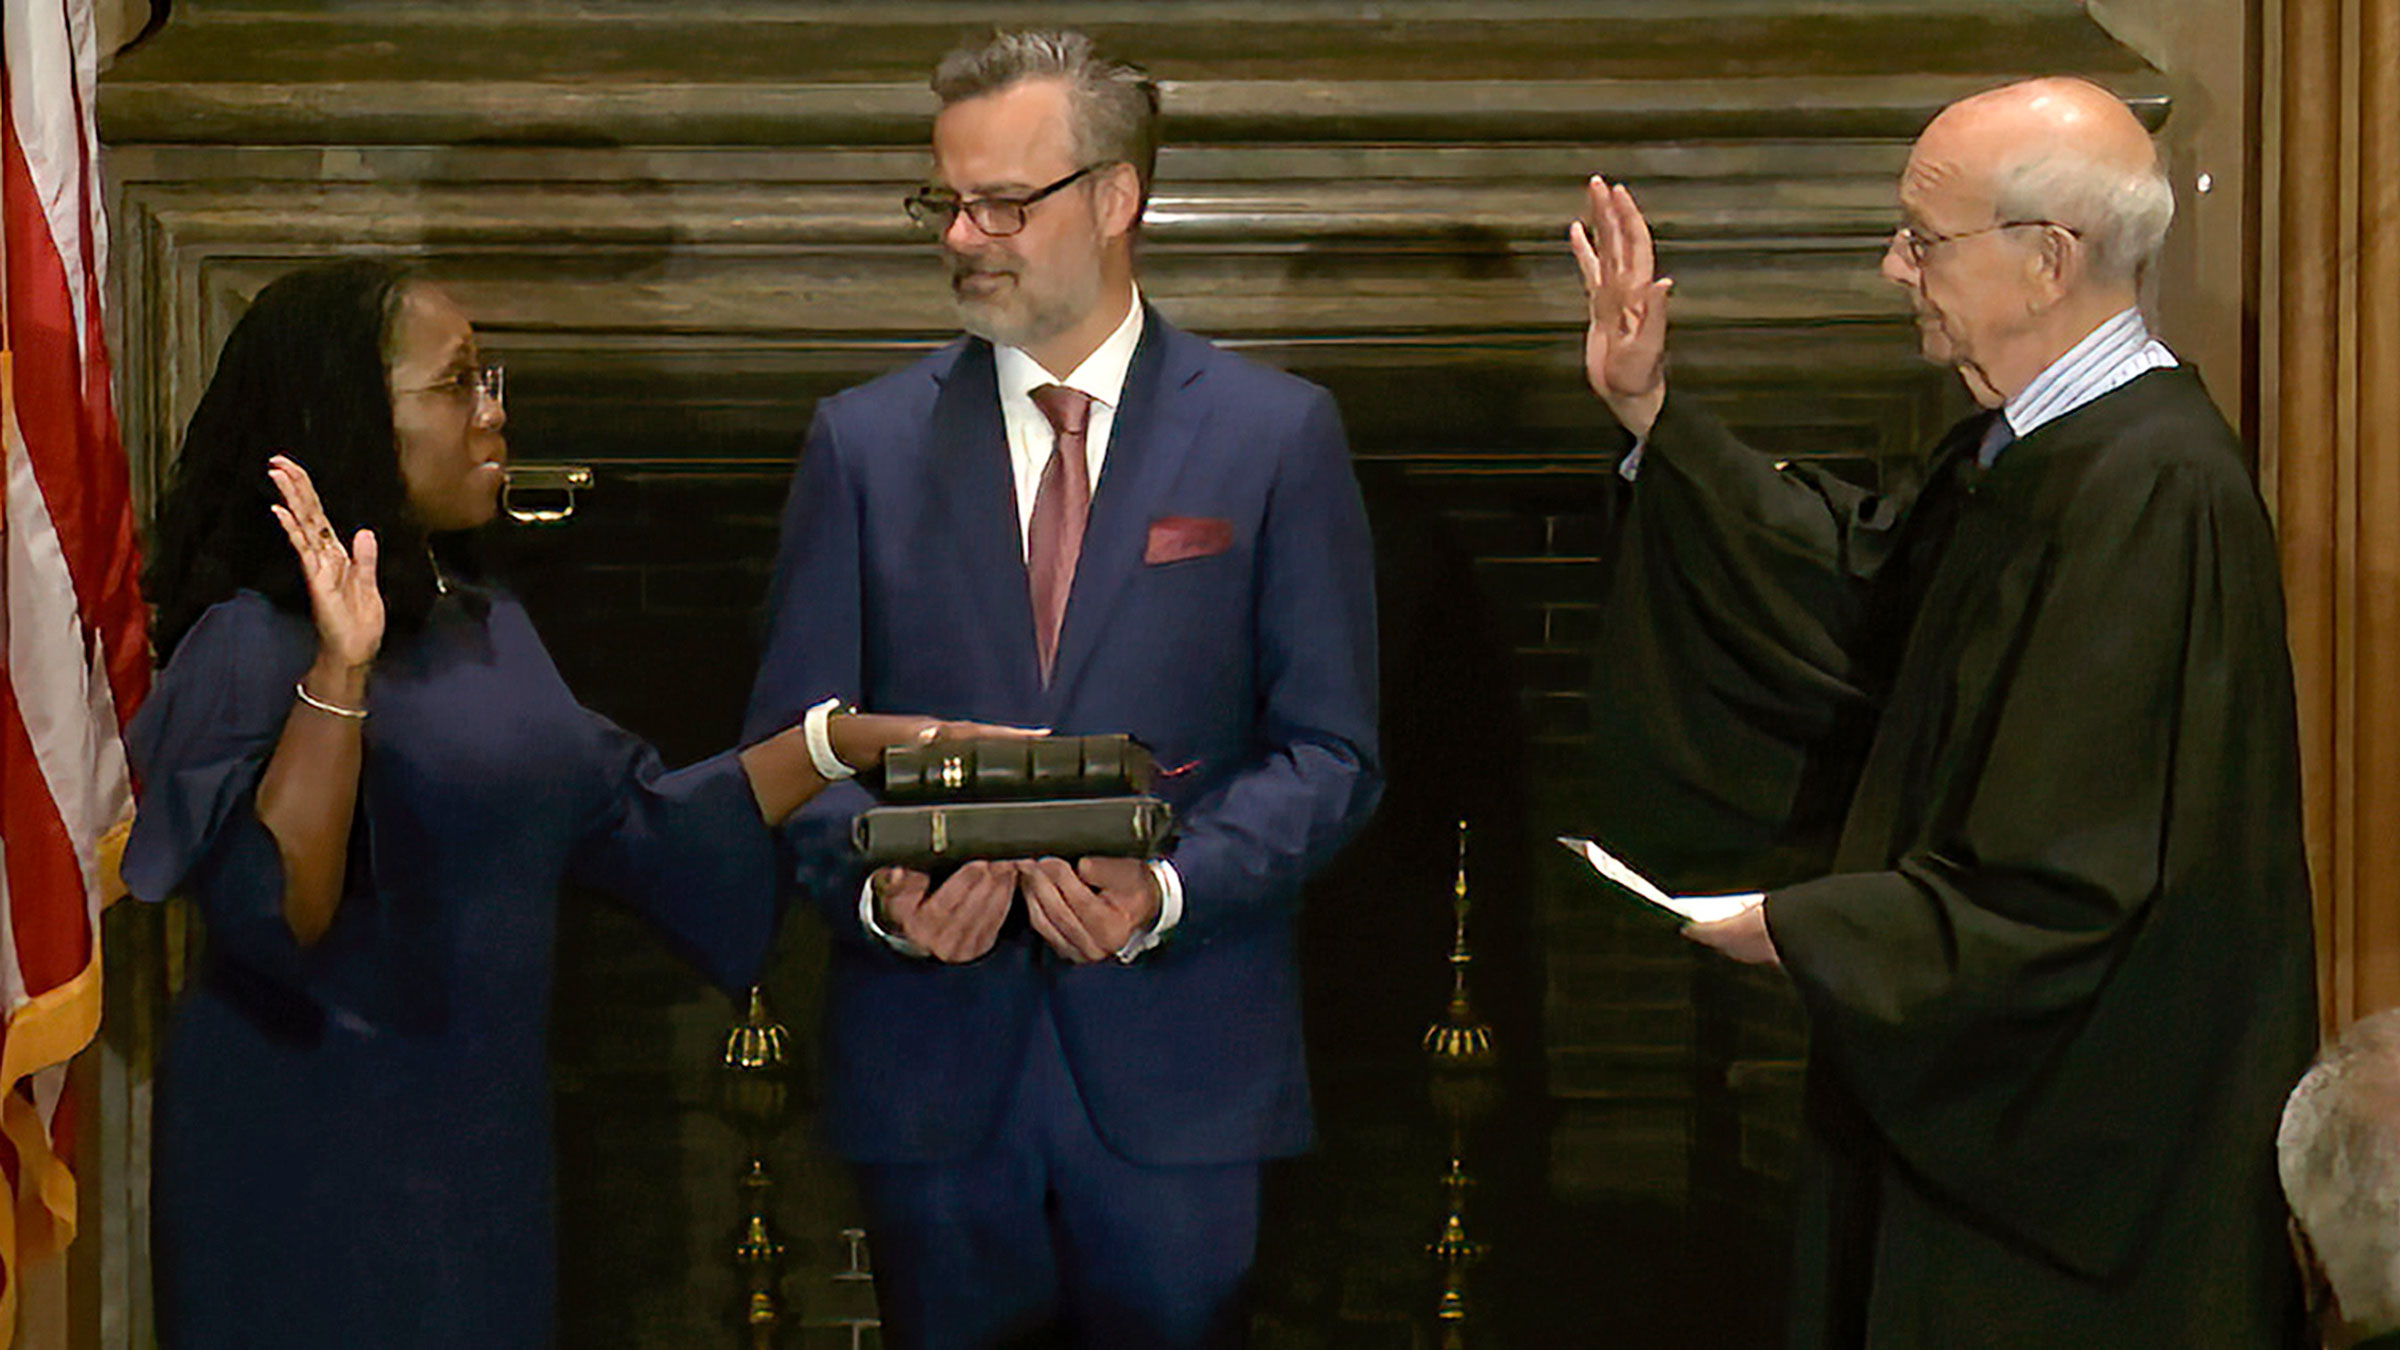 In this image from video provided by the Supreme Court, retired Supreme Court Justice Stephen Breyer administers the judicial oath to Ketanji Brown Jackson on Thursday. Her husband, Patrick, is holding the Bible next to her.